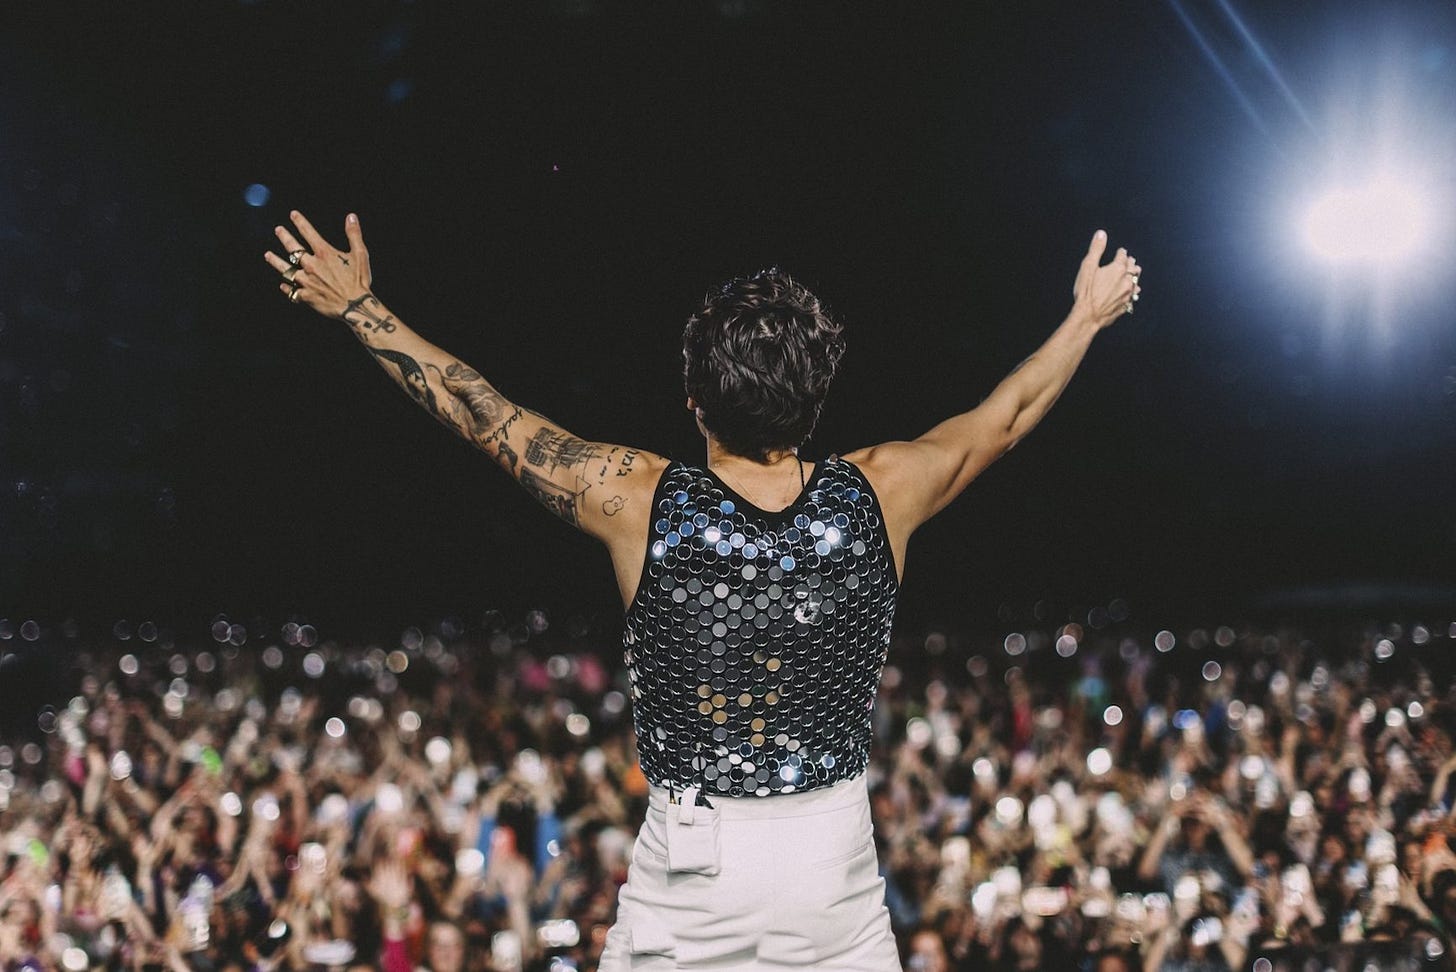 Harry Styles on stage, seen from the back, wearing white pantss and a silver sequinned top, his arms outstretched. The crowd is in the background, out of focus,